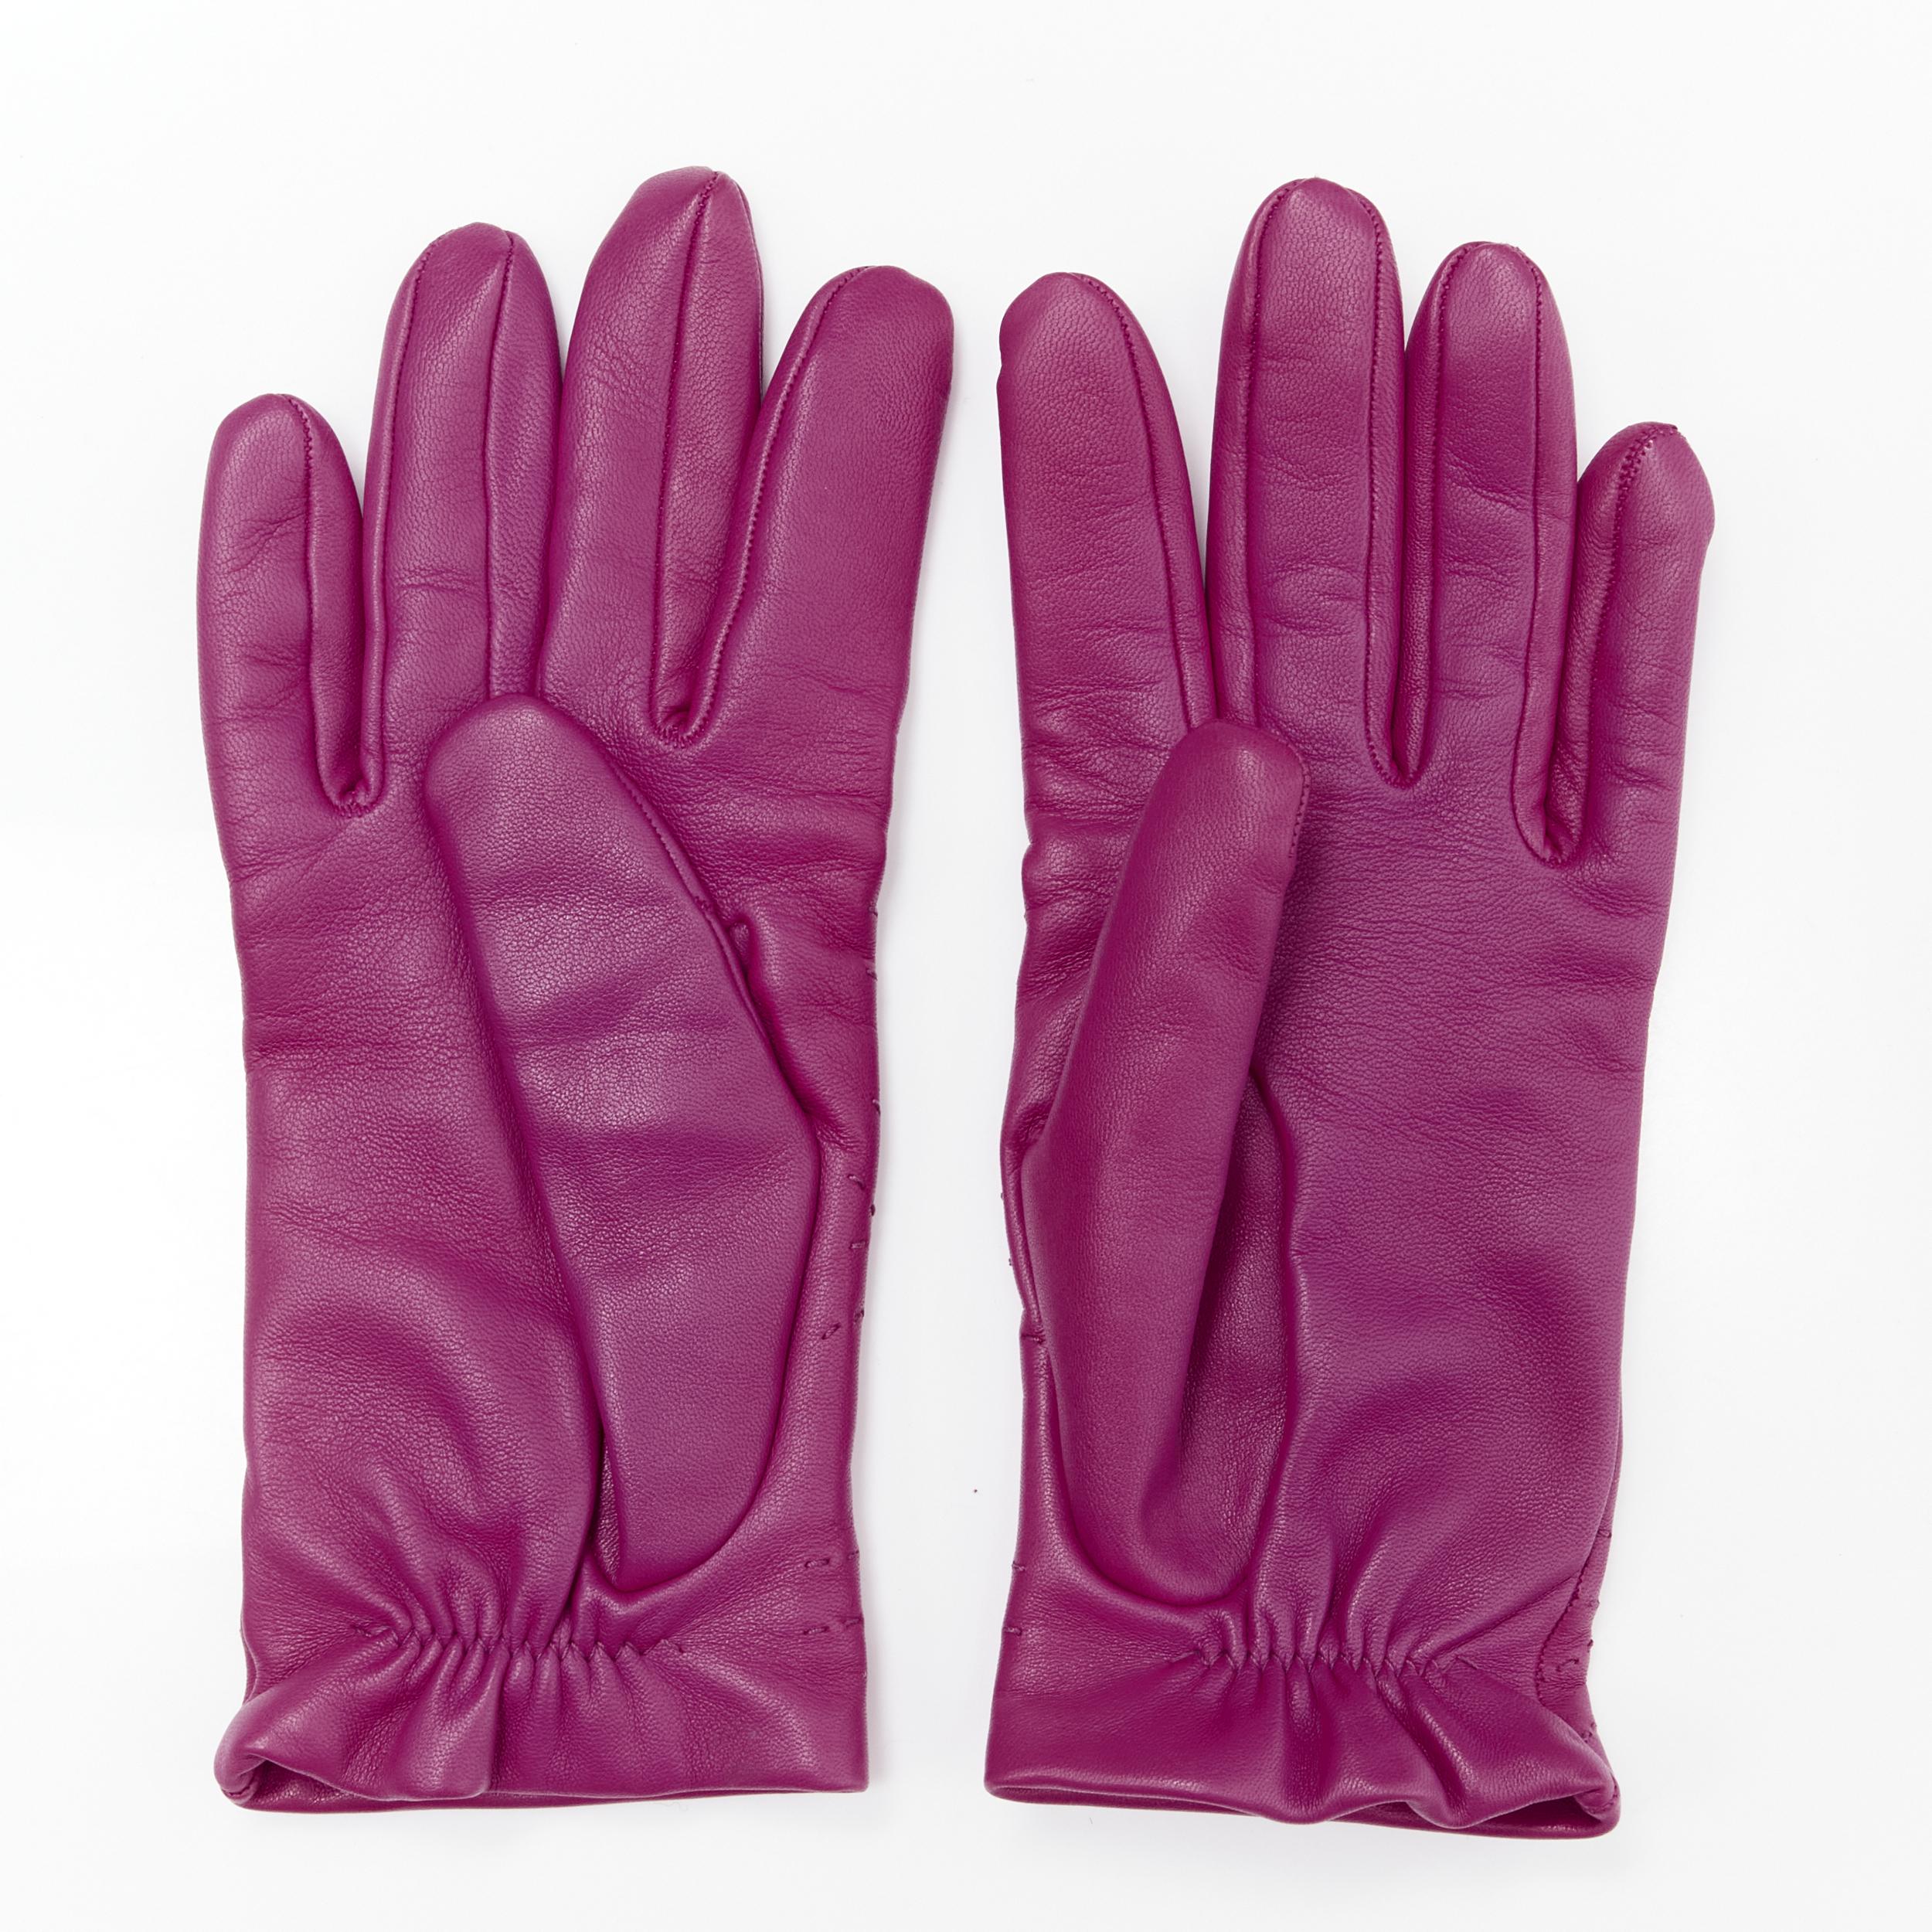 HERMES purple lamb leather overstitching 100% cashmere lined glove 7.5 
Reference: MELK/A00164 
Brand: Hermes 
Material: Leather 
Color: Purple 
Pattern: Solid 
Extra Detail: Elasticated stretch cuff 
Made in: France 

CONDITION: 
Condition: